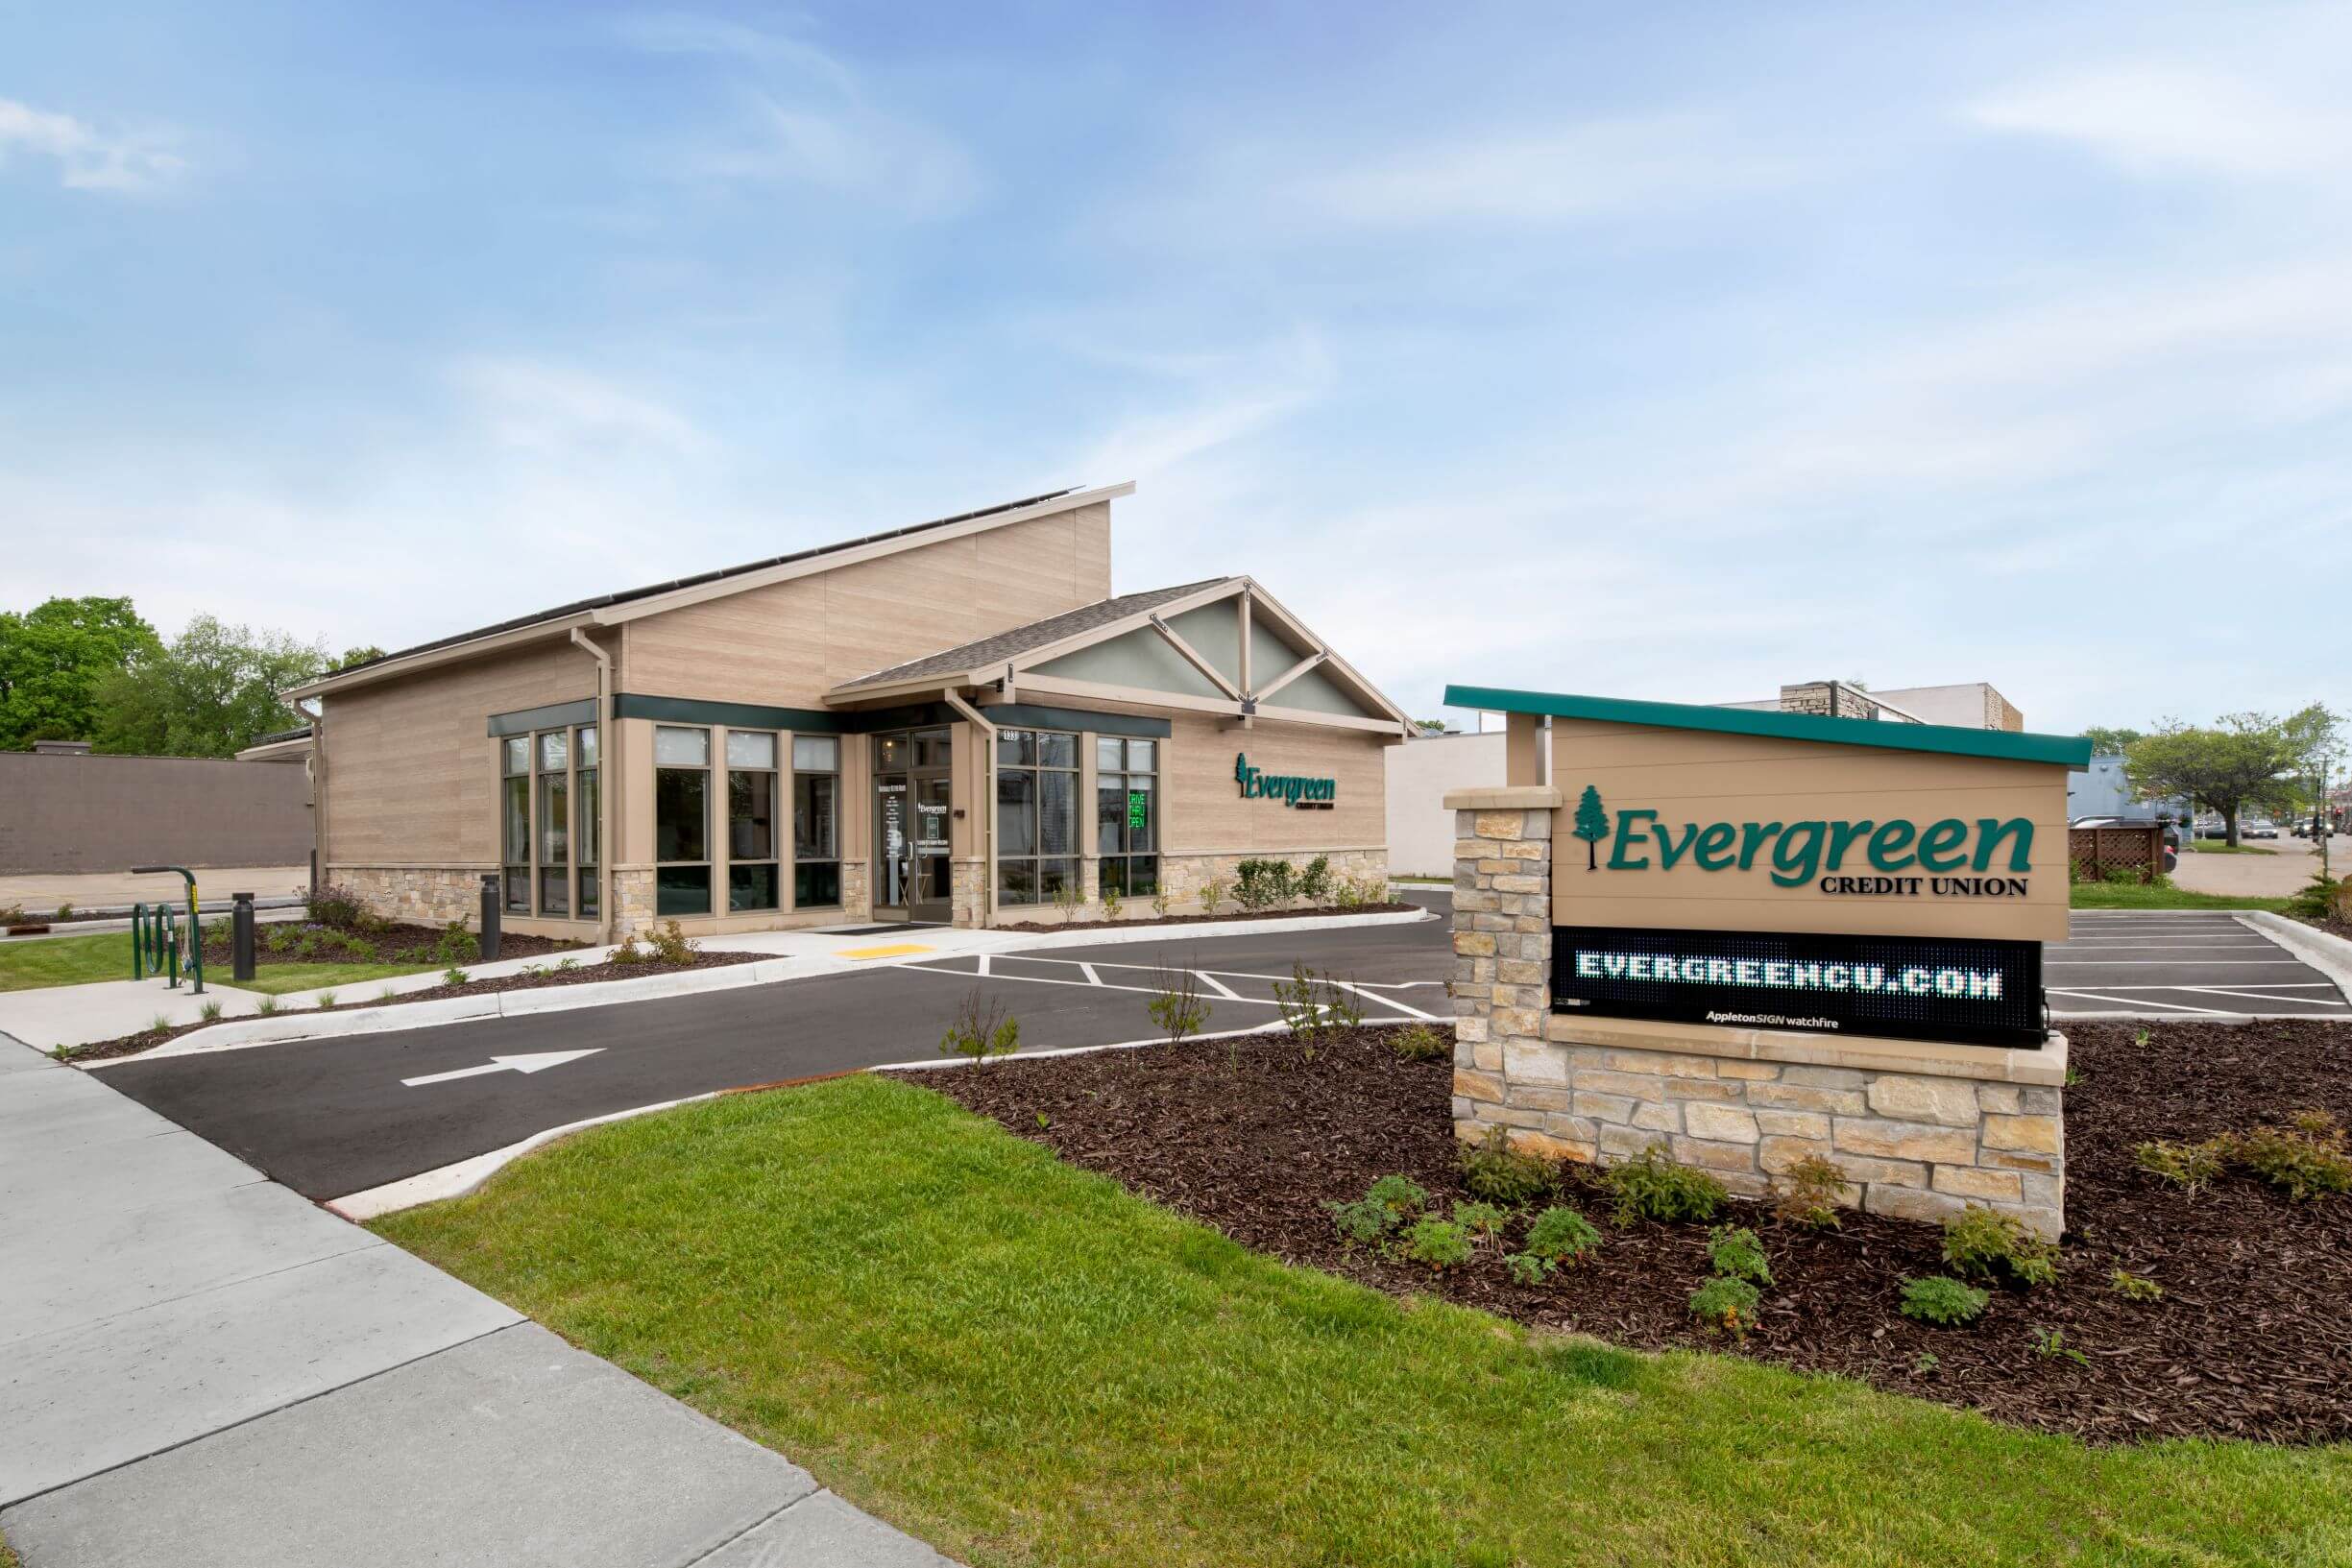 Evergreen Credit Union exterior of the building